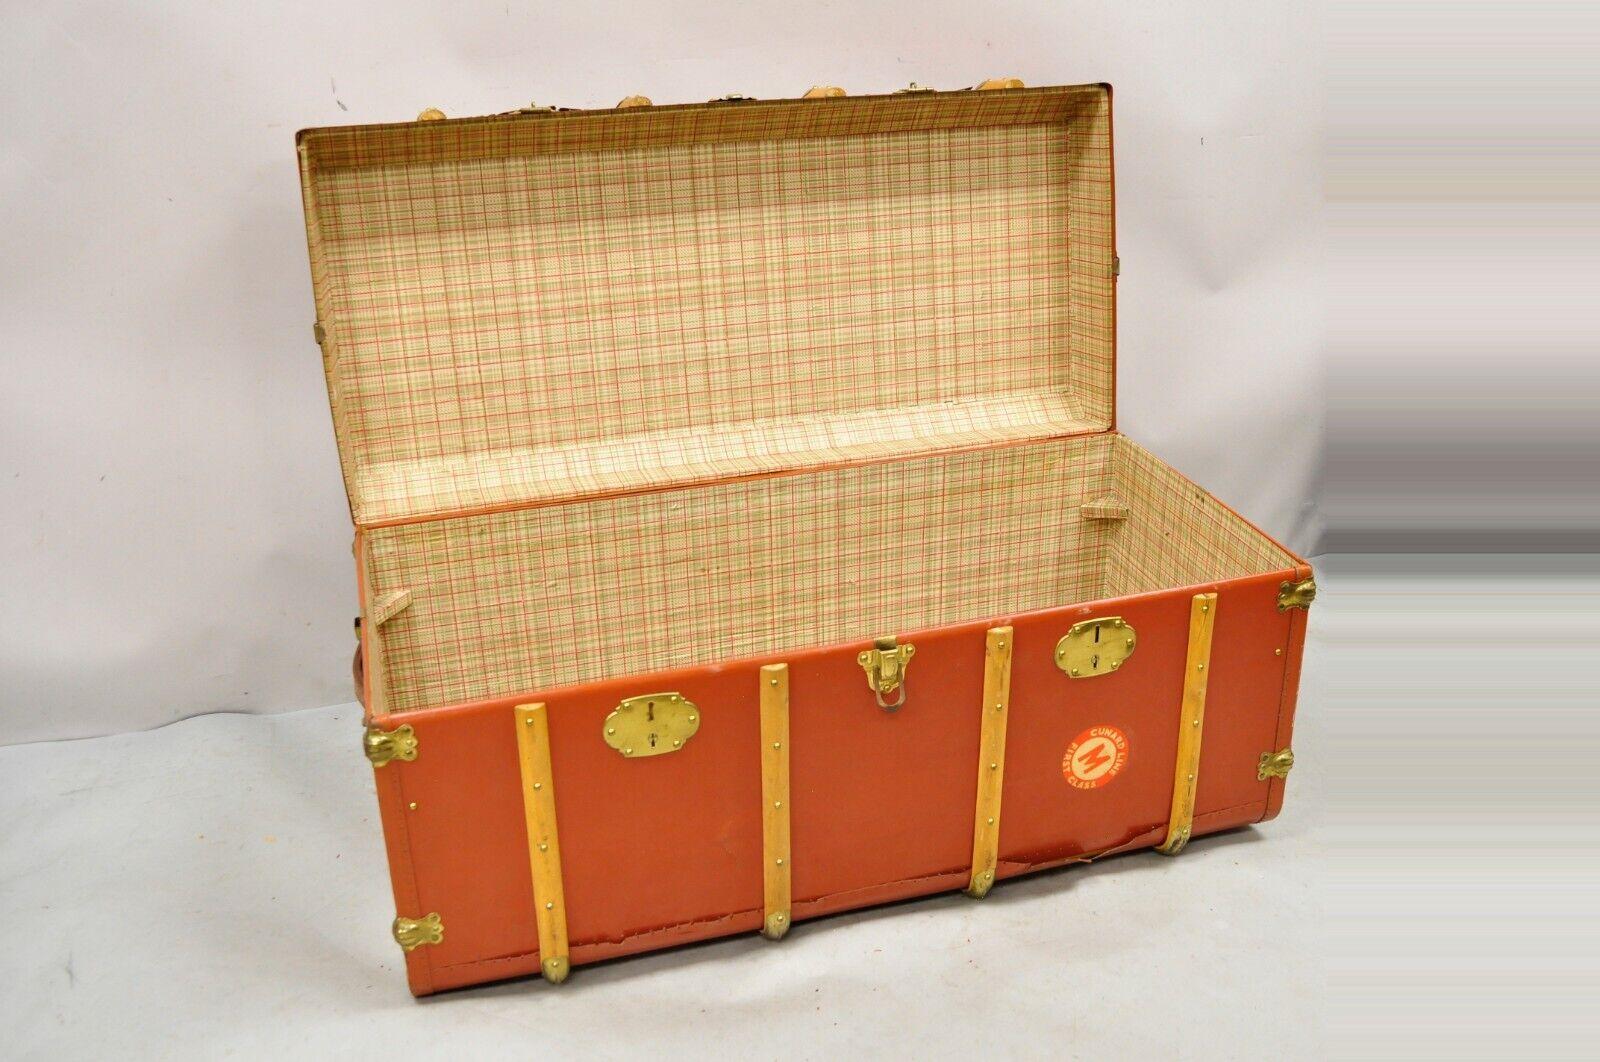 Antique Wooden Band Large Steamer Trunk Orange Ship Trunk Cunard Line Decals In Good Condition For Sale In Philadelphia, PA